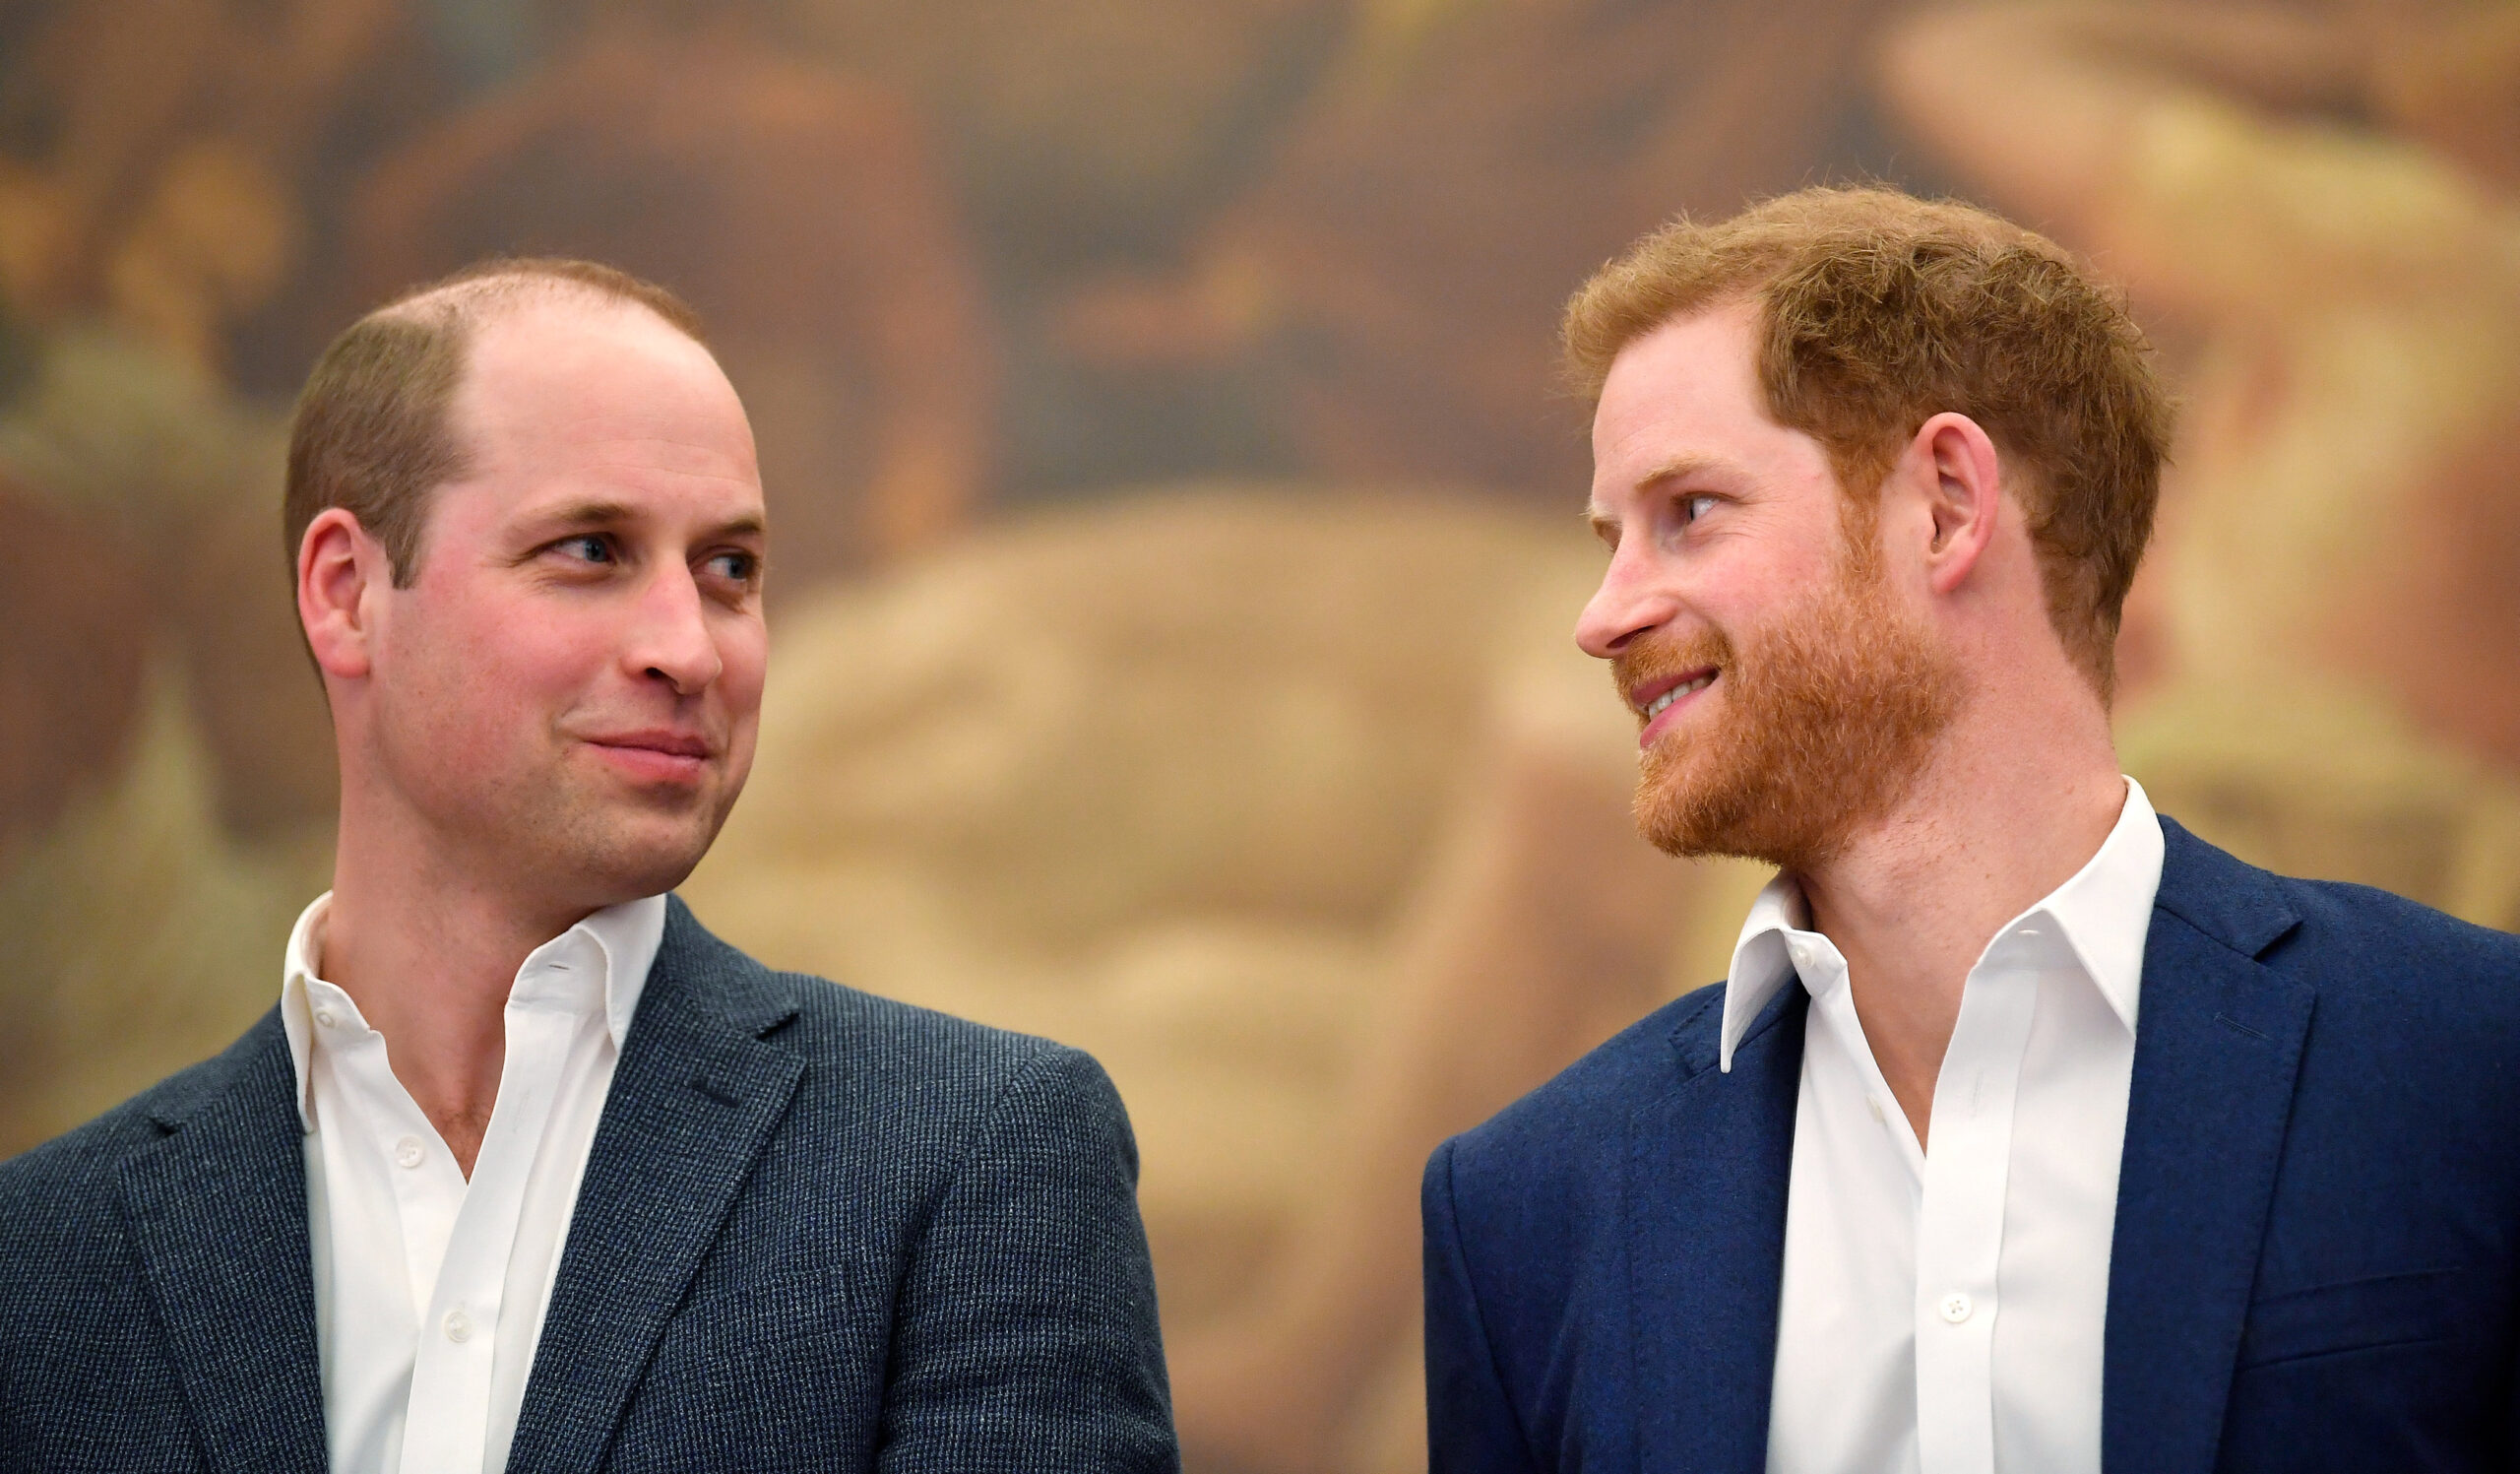 It’s official: Prince Harry has asked Prince William to be his best man